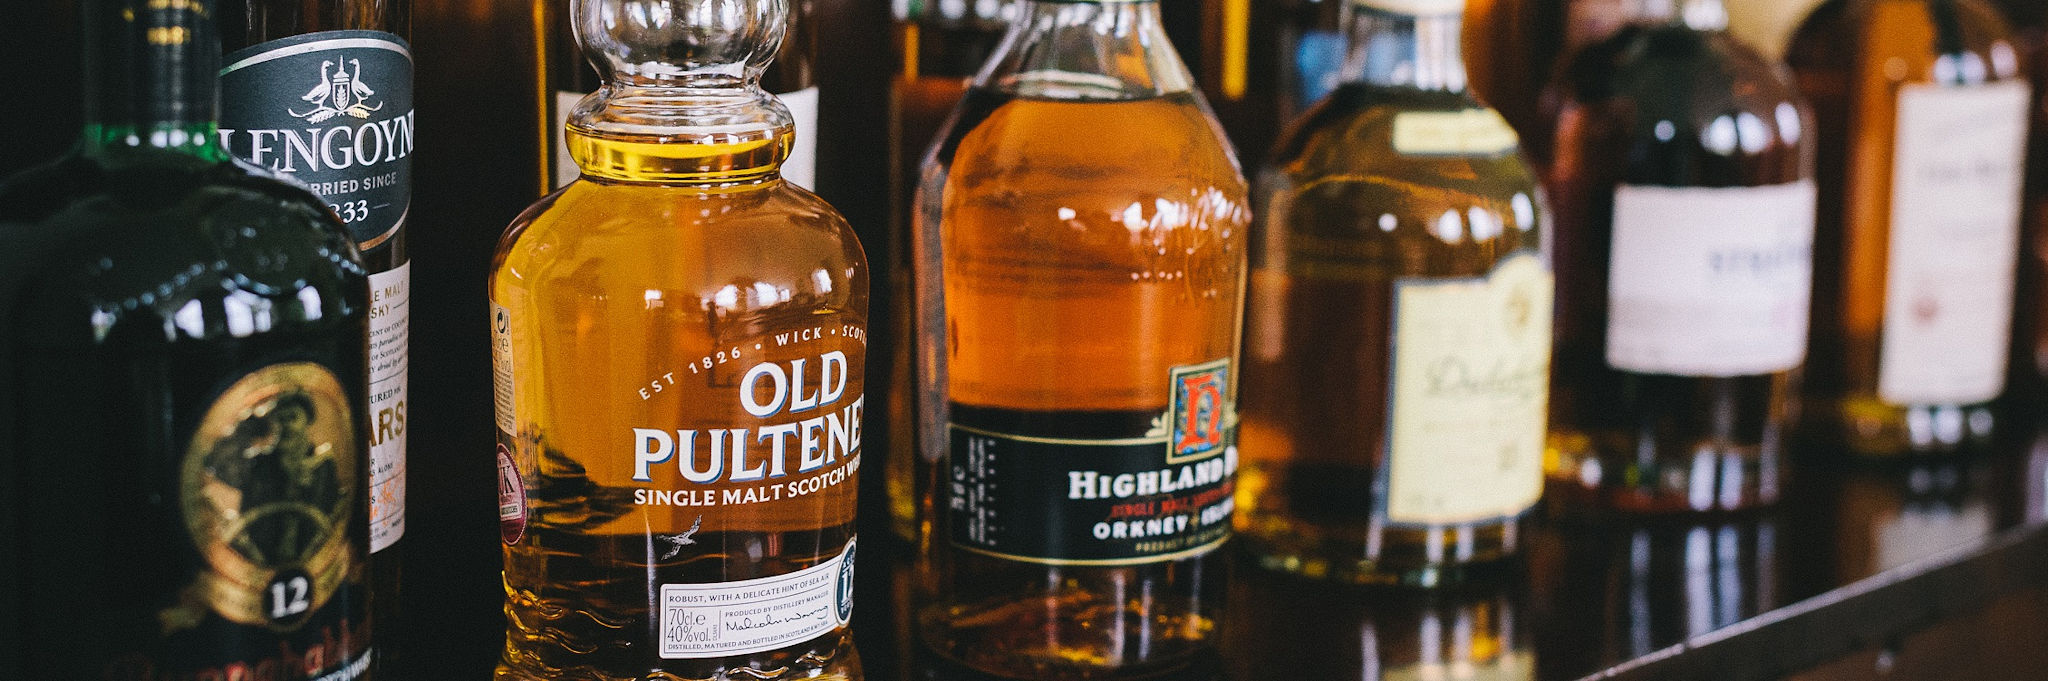 Whisky in Scotland